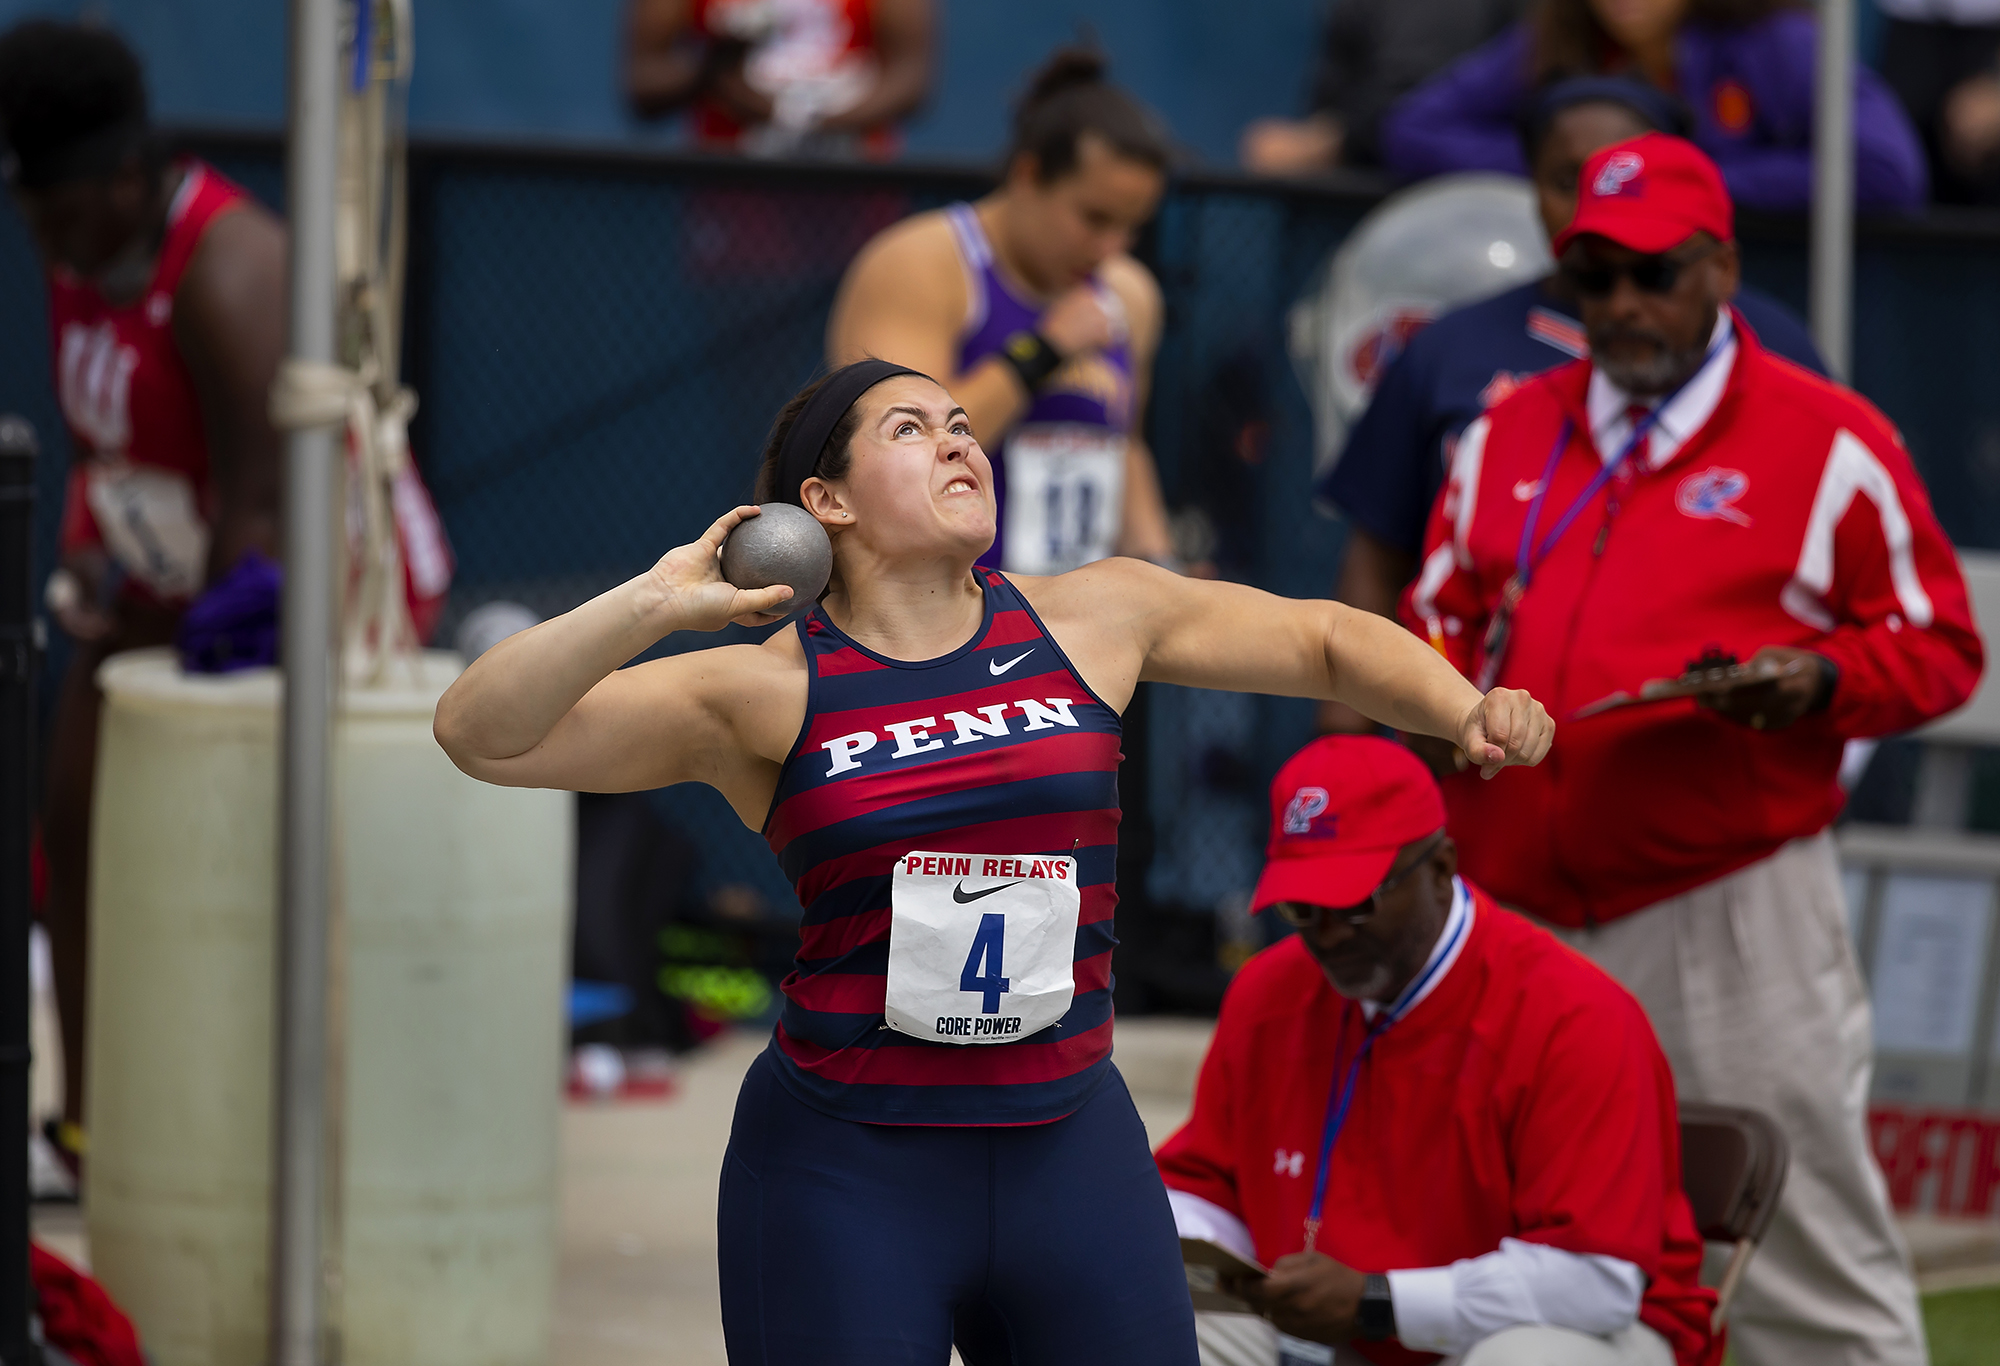 Maura Kimmel of Penn competes in field events at the 2019 Penn Relays.